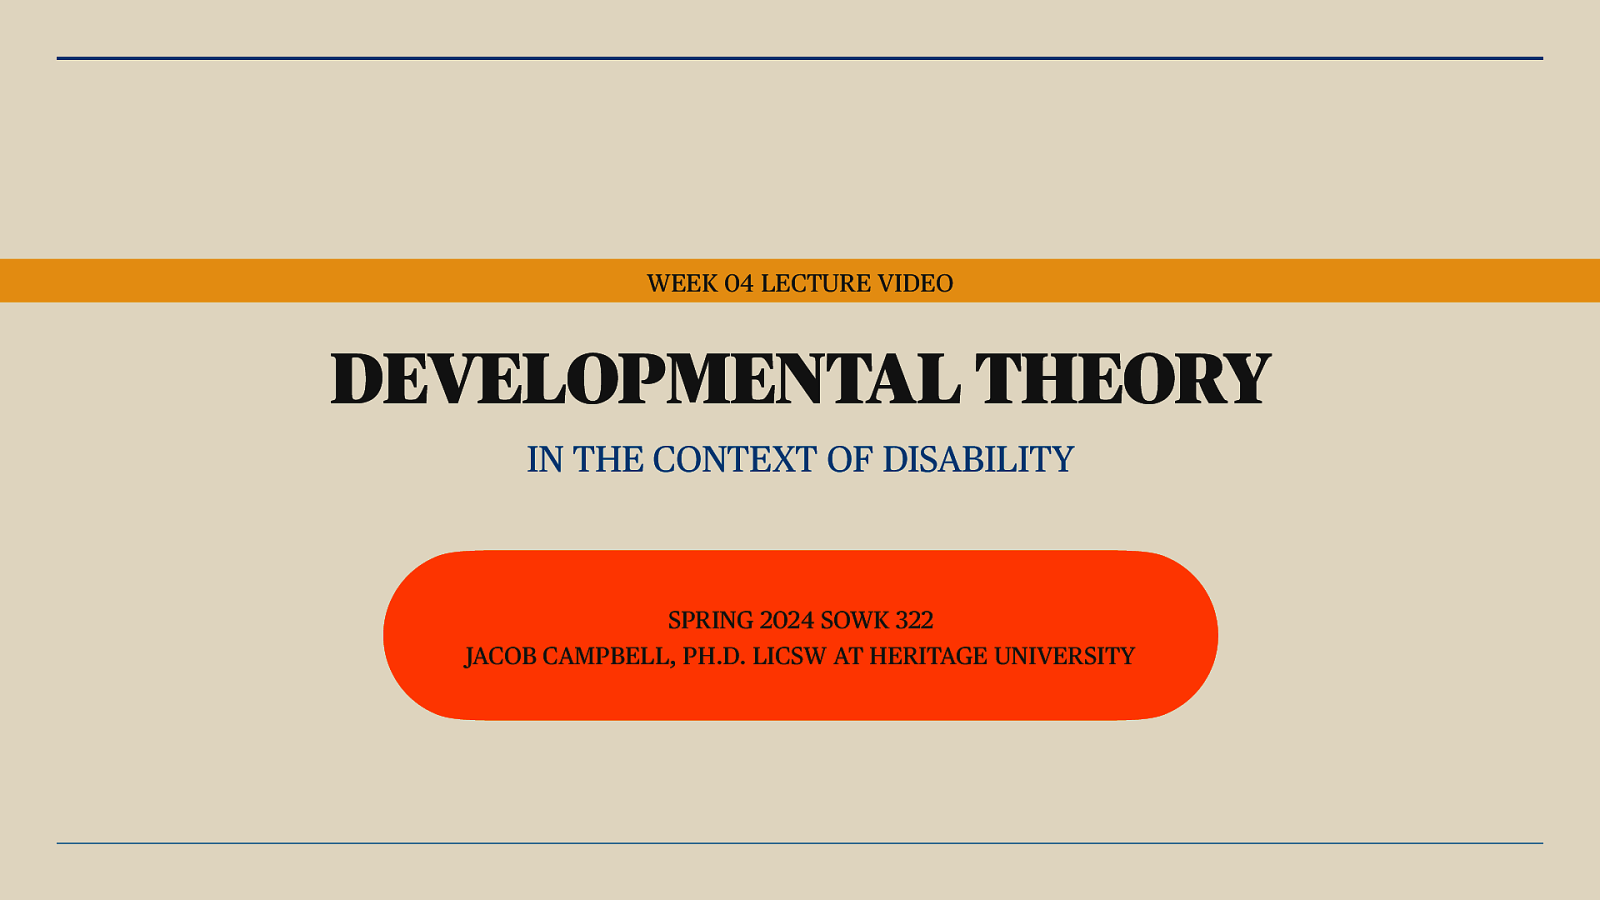 Spring 2024 SOWK 322 Week 04 - Developmental Theory in the Context of Disability